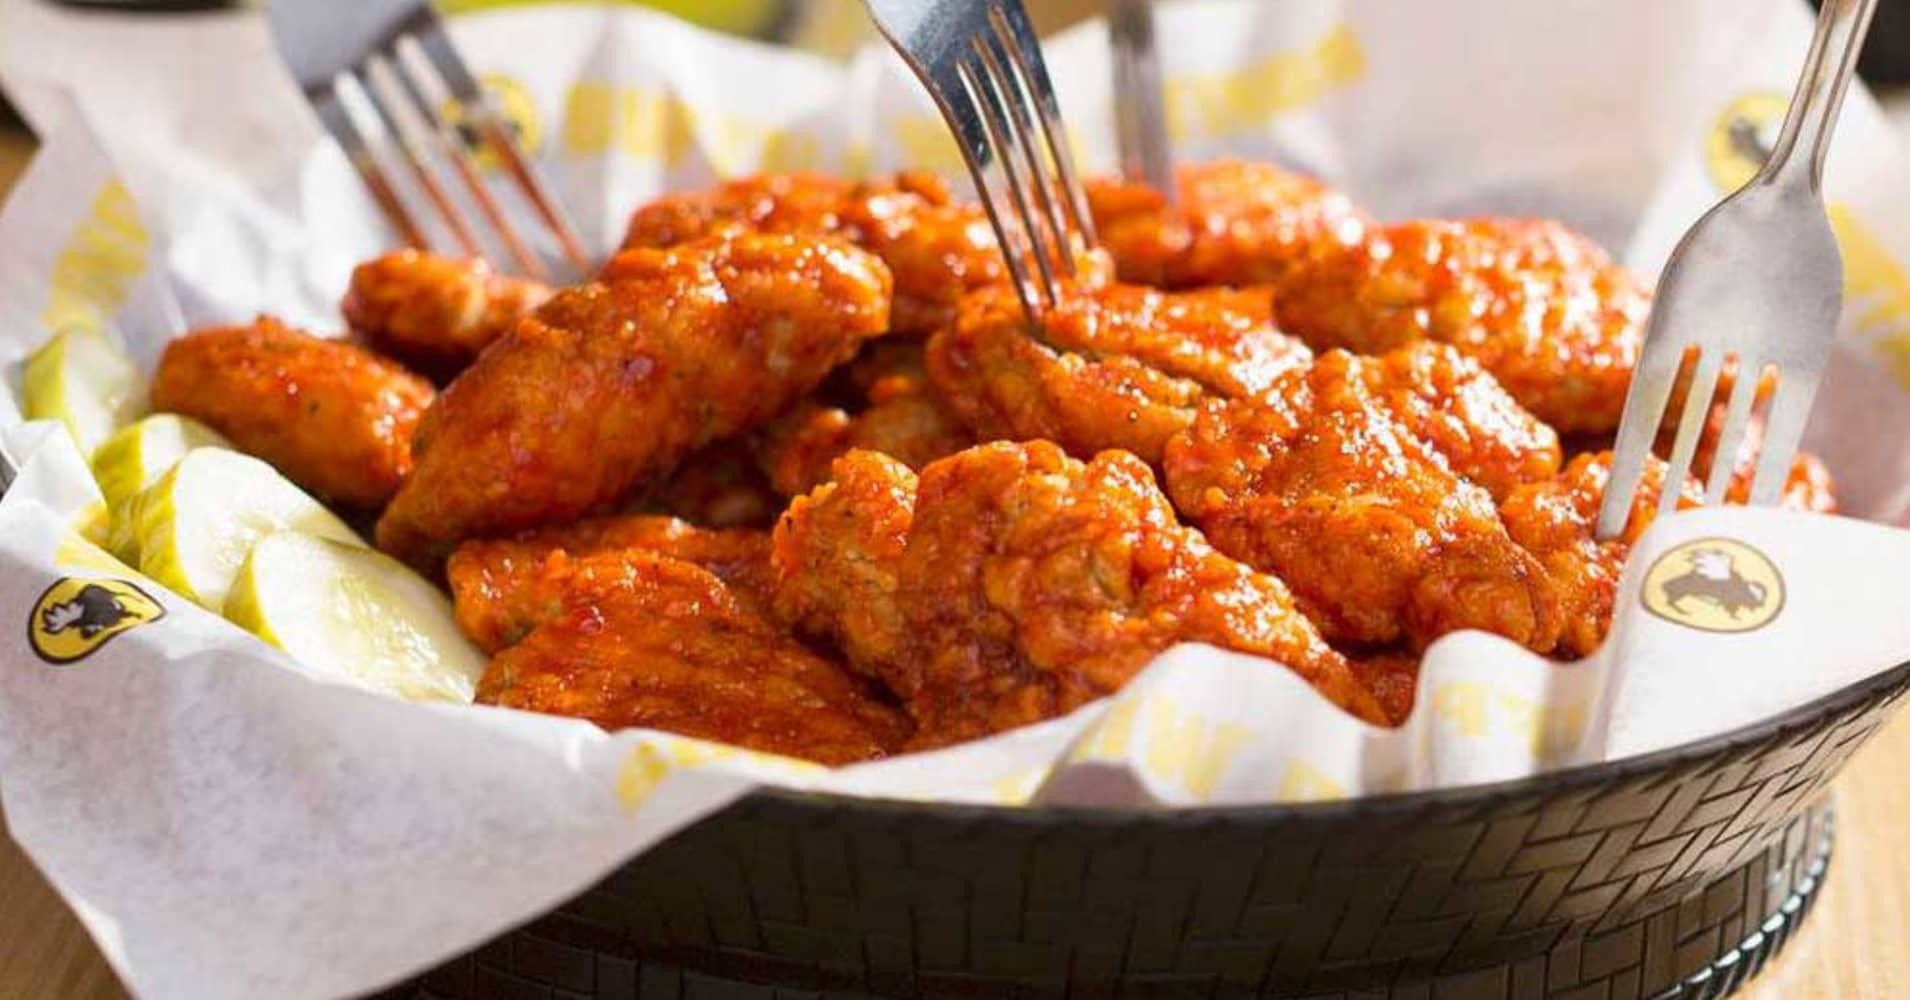 Buffalo Wild Wings Grilled Chicken Buffalito
 Buffalo Wild Wings challenges Marcato says claims are